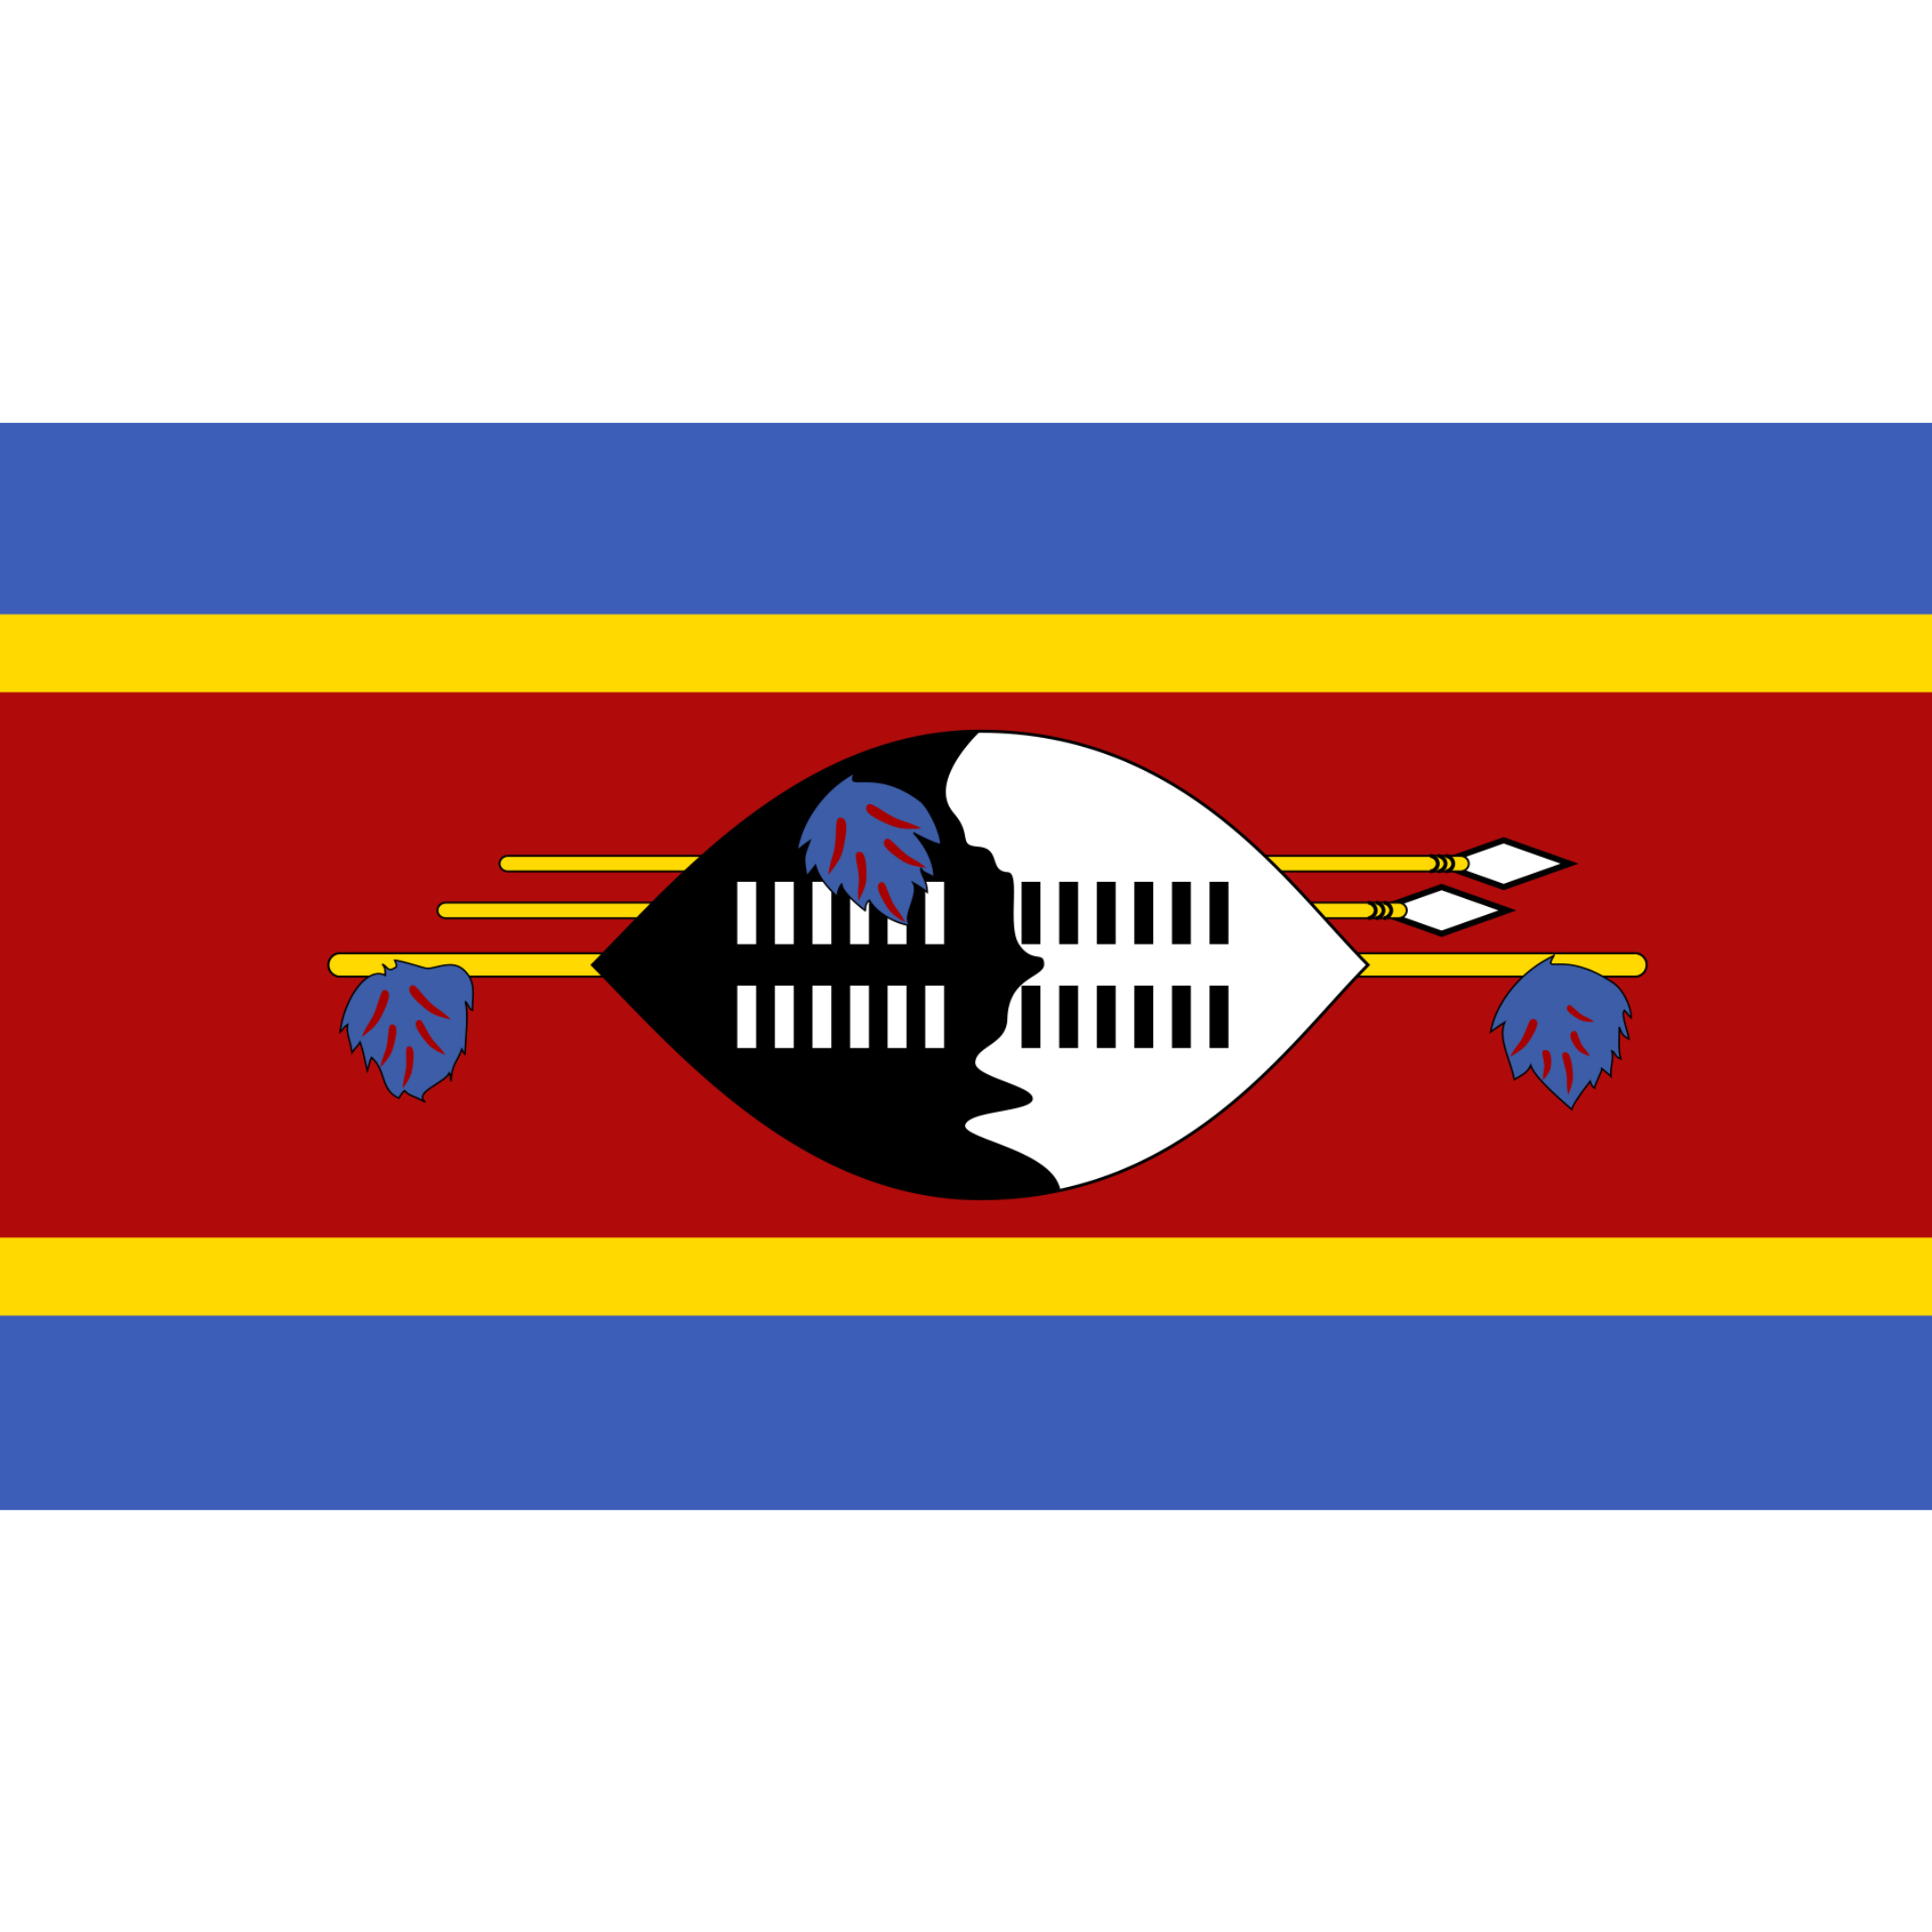 The Eswatini flag has a background of blue, yellow and red horizontal stripes, with a black and white shield in the middle.